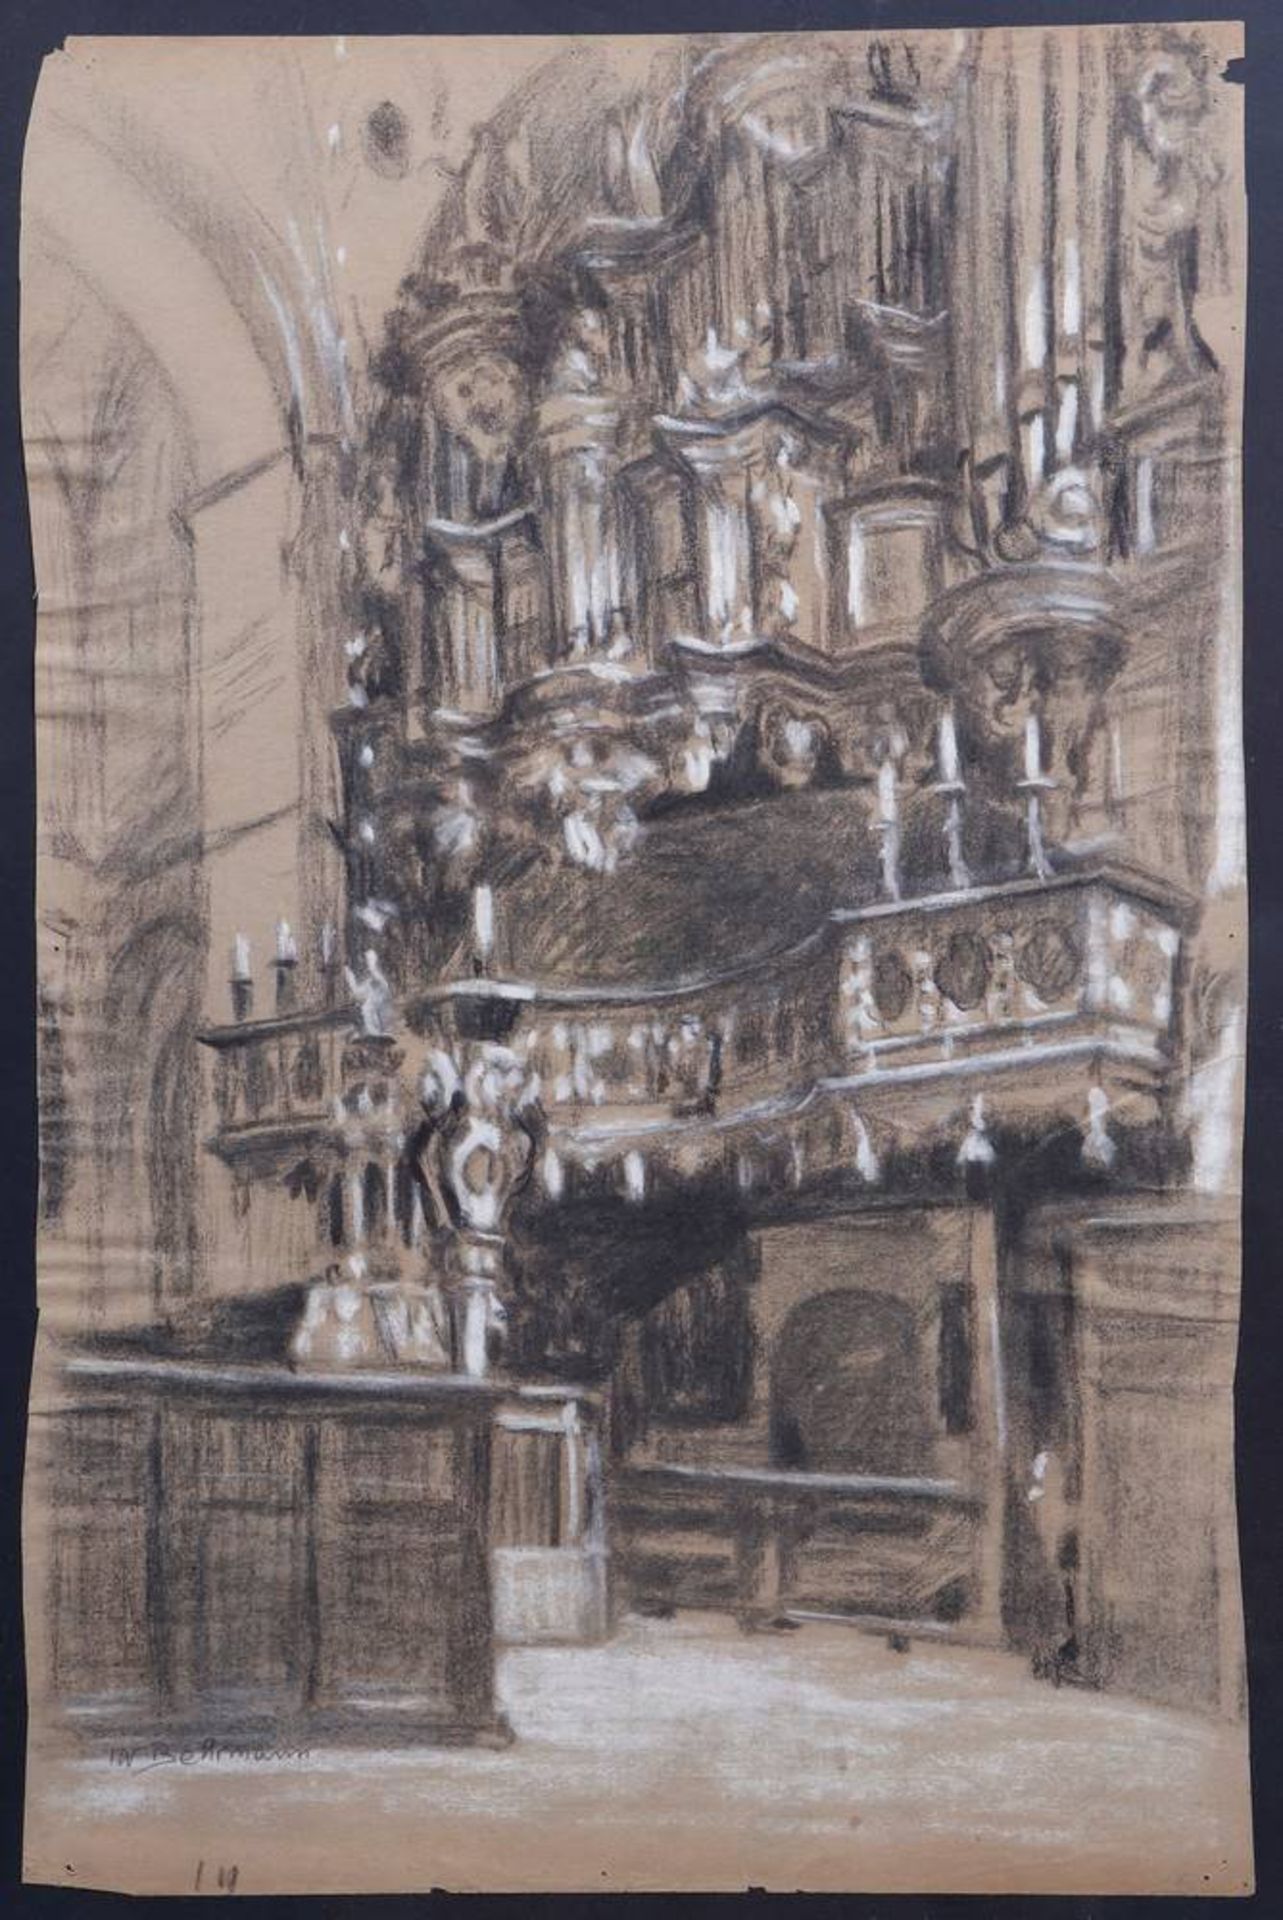 Organ and interior of Lübeck Cathedral before the bombing - Image 3 of 5